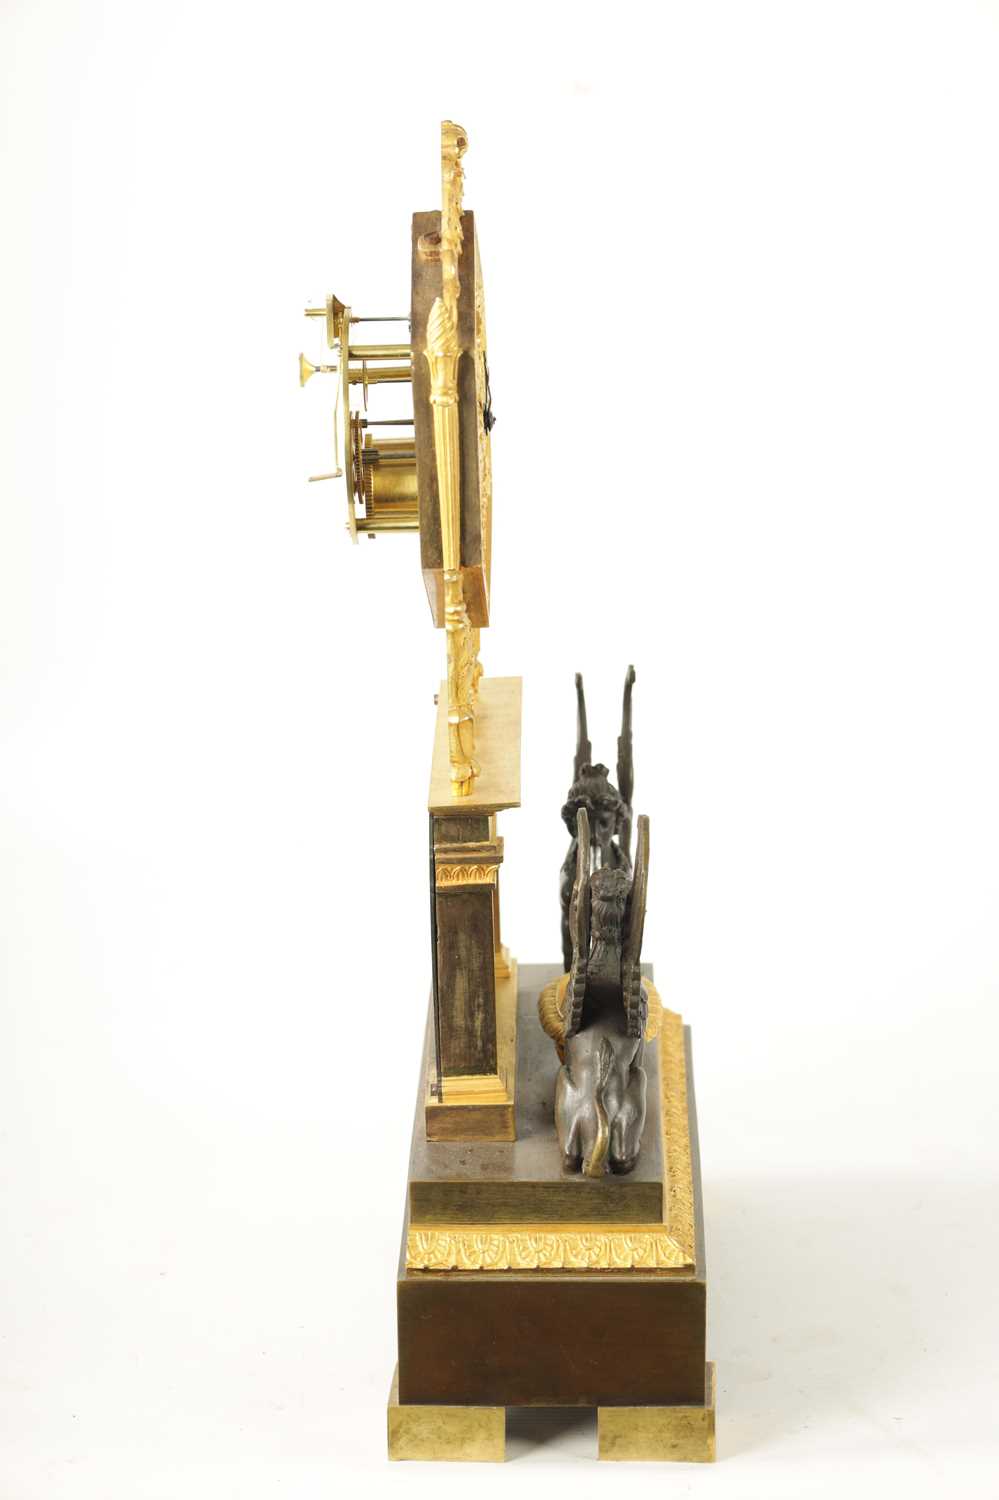 A GOOD LATE REGENCY FRENCH BRONZE AND ORMOLU AUTOMATION MANTEL CLOCK BY ROBERT PARIS NO.827 - Image 8 of 10